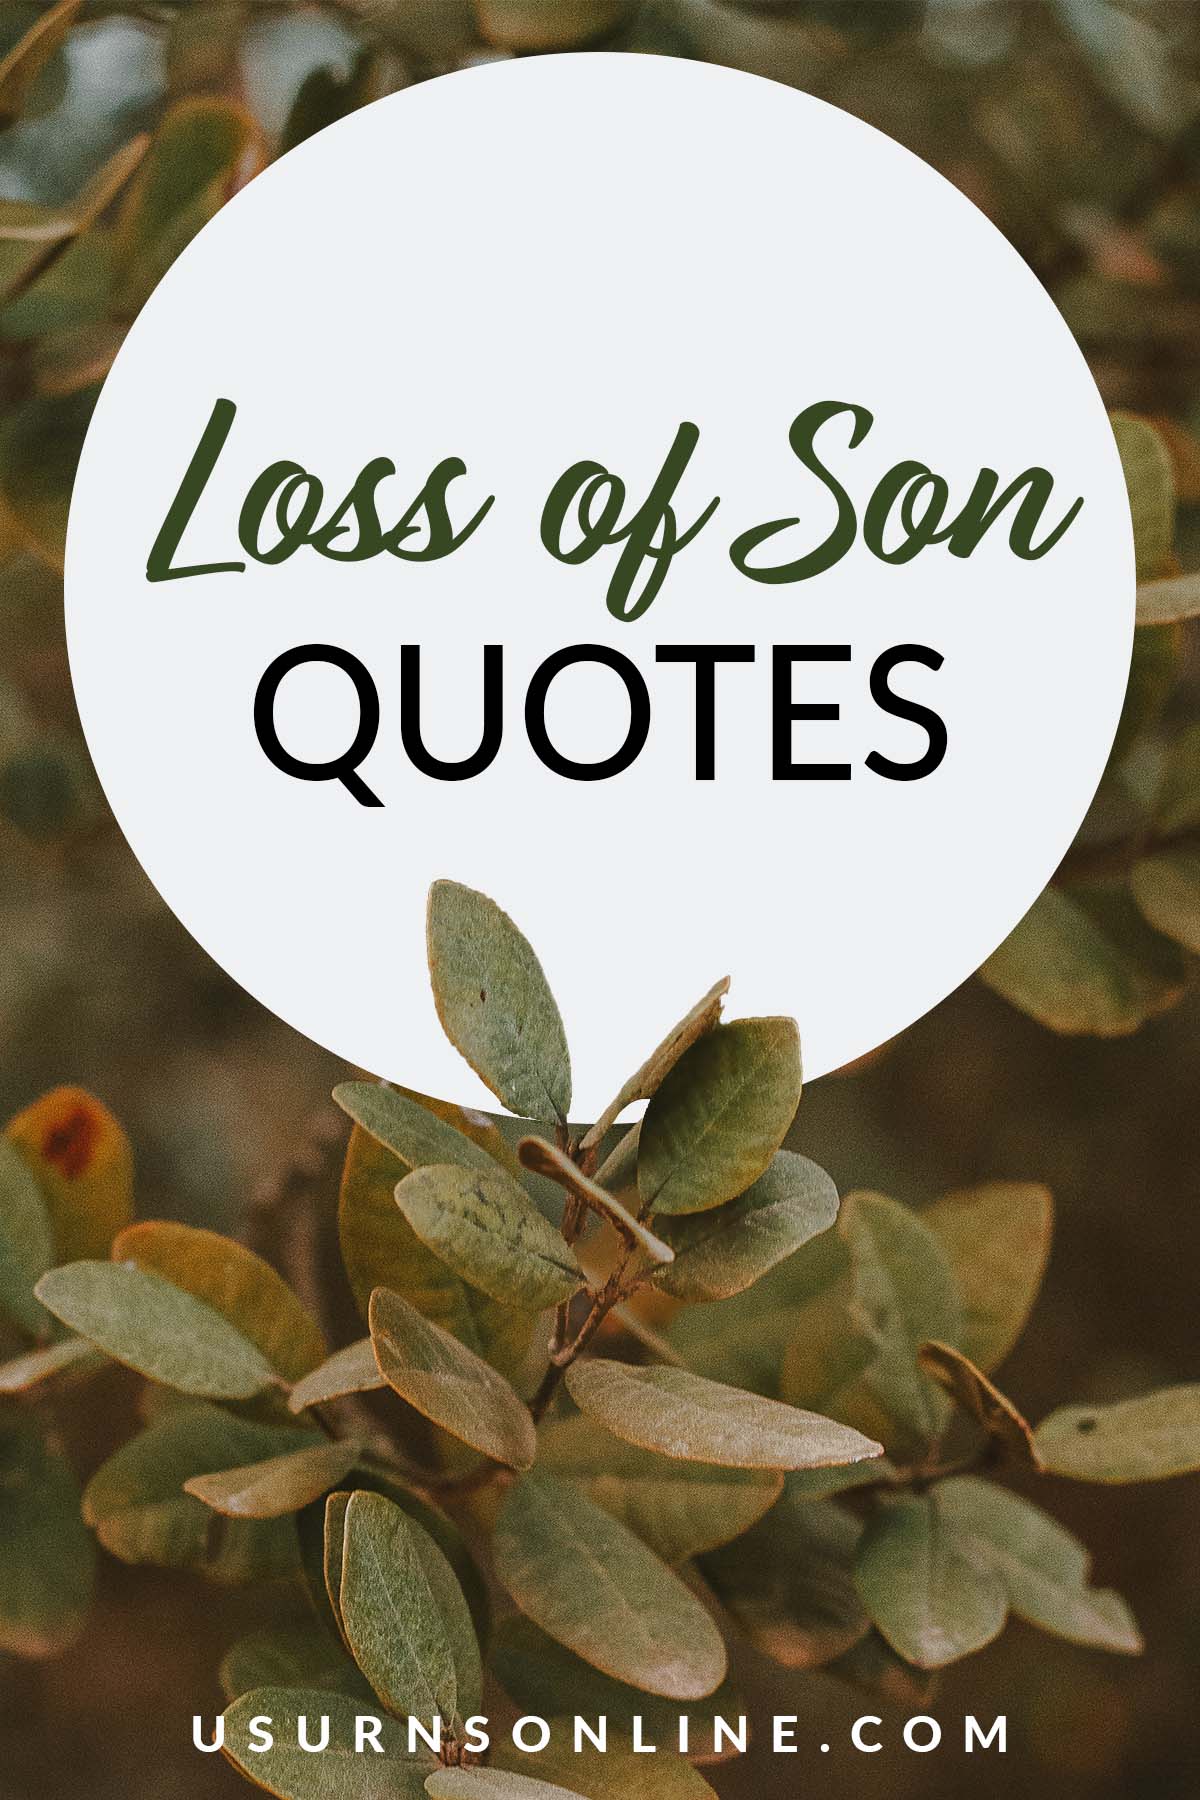 A Letter To My Son From Heaven, Gift To Son, Loss Of A Mother